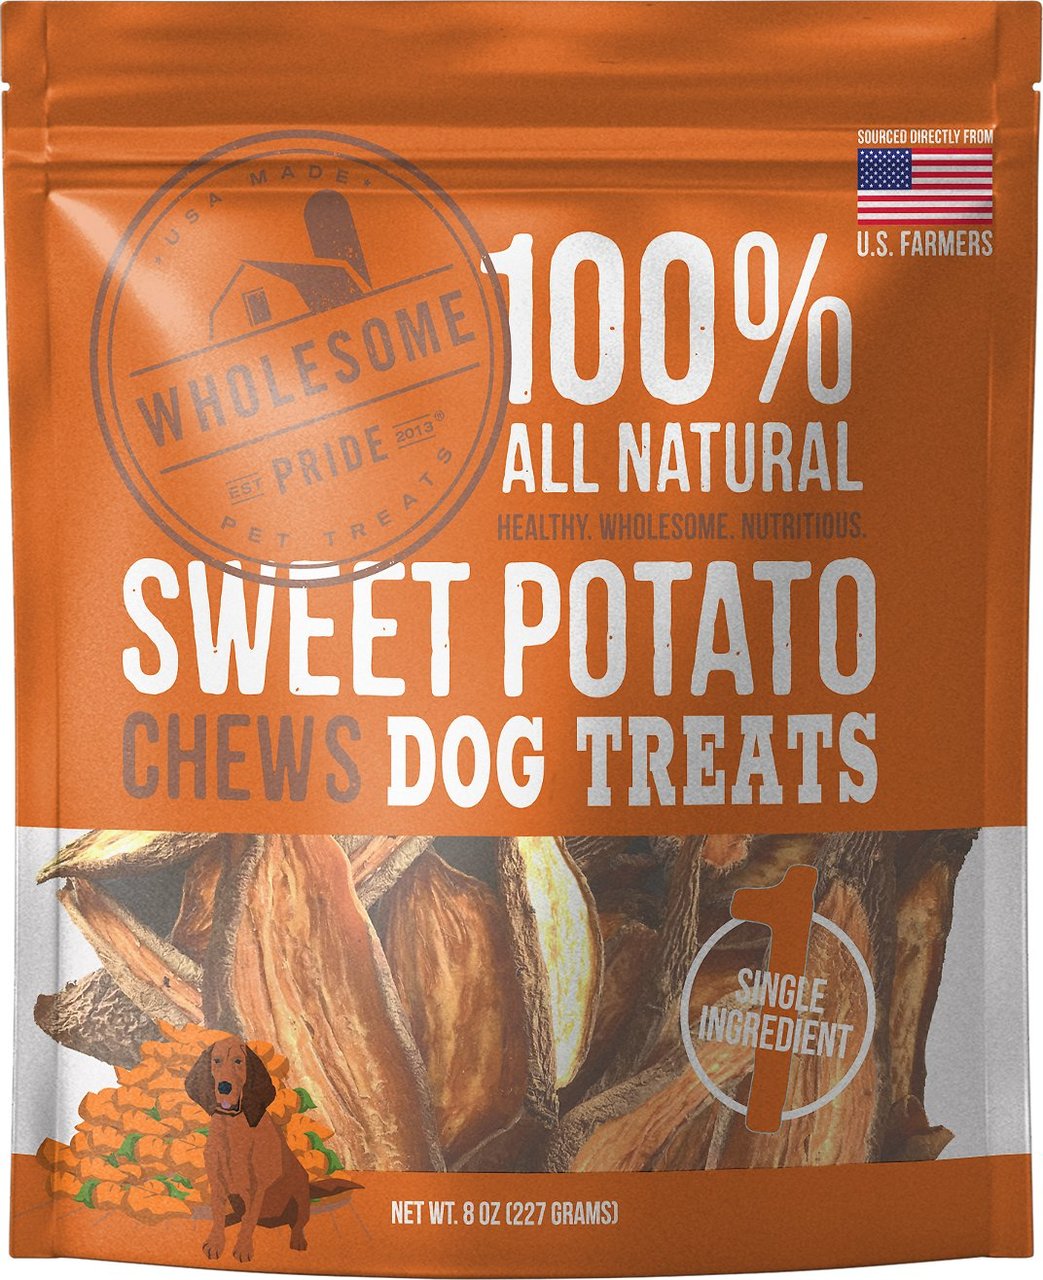 Sweet Potato Treat Product Review